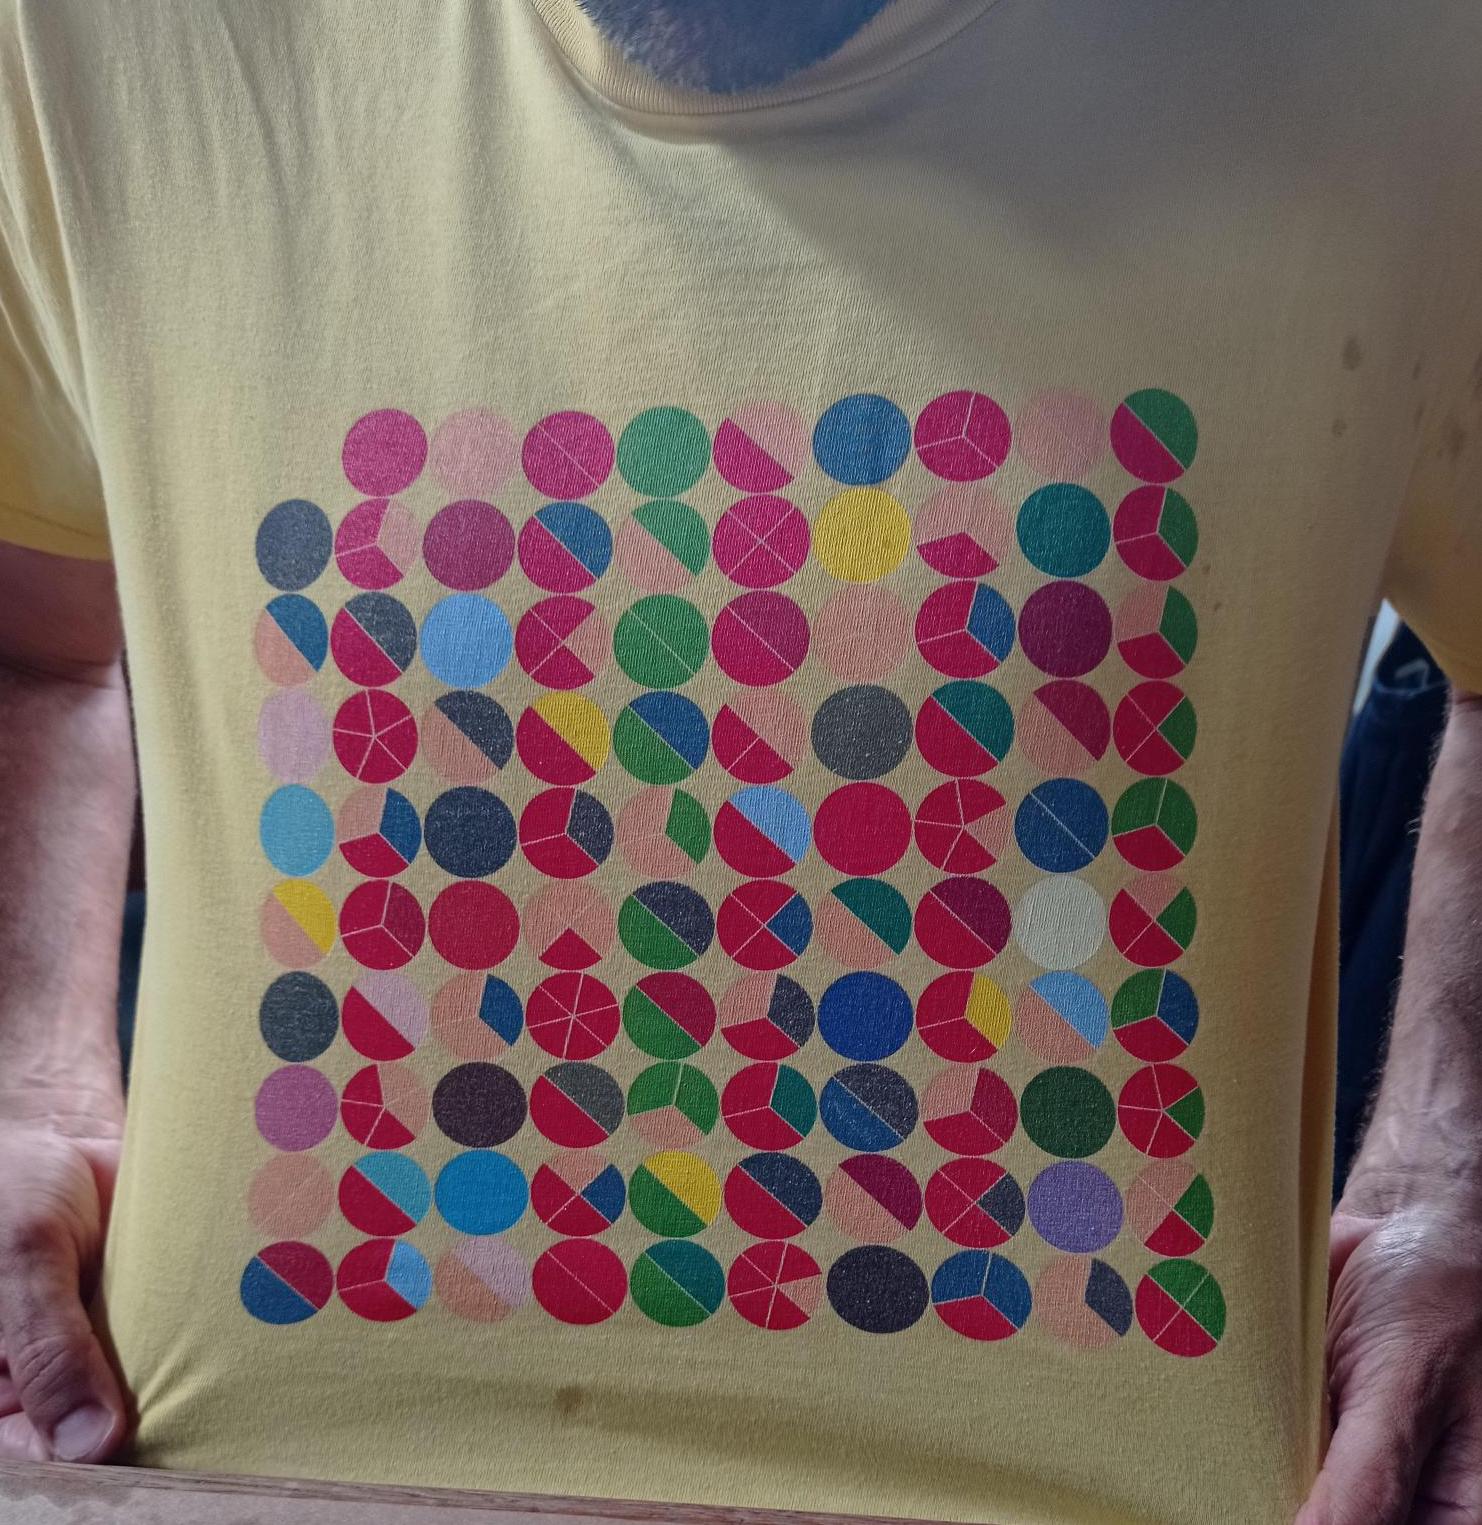 T-shirt with 99 circles representing the numbers 2 to 100, each coloured to reflect their prime factors